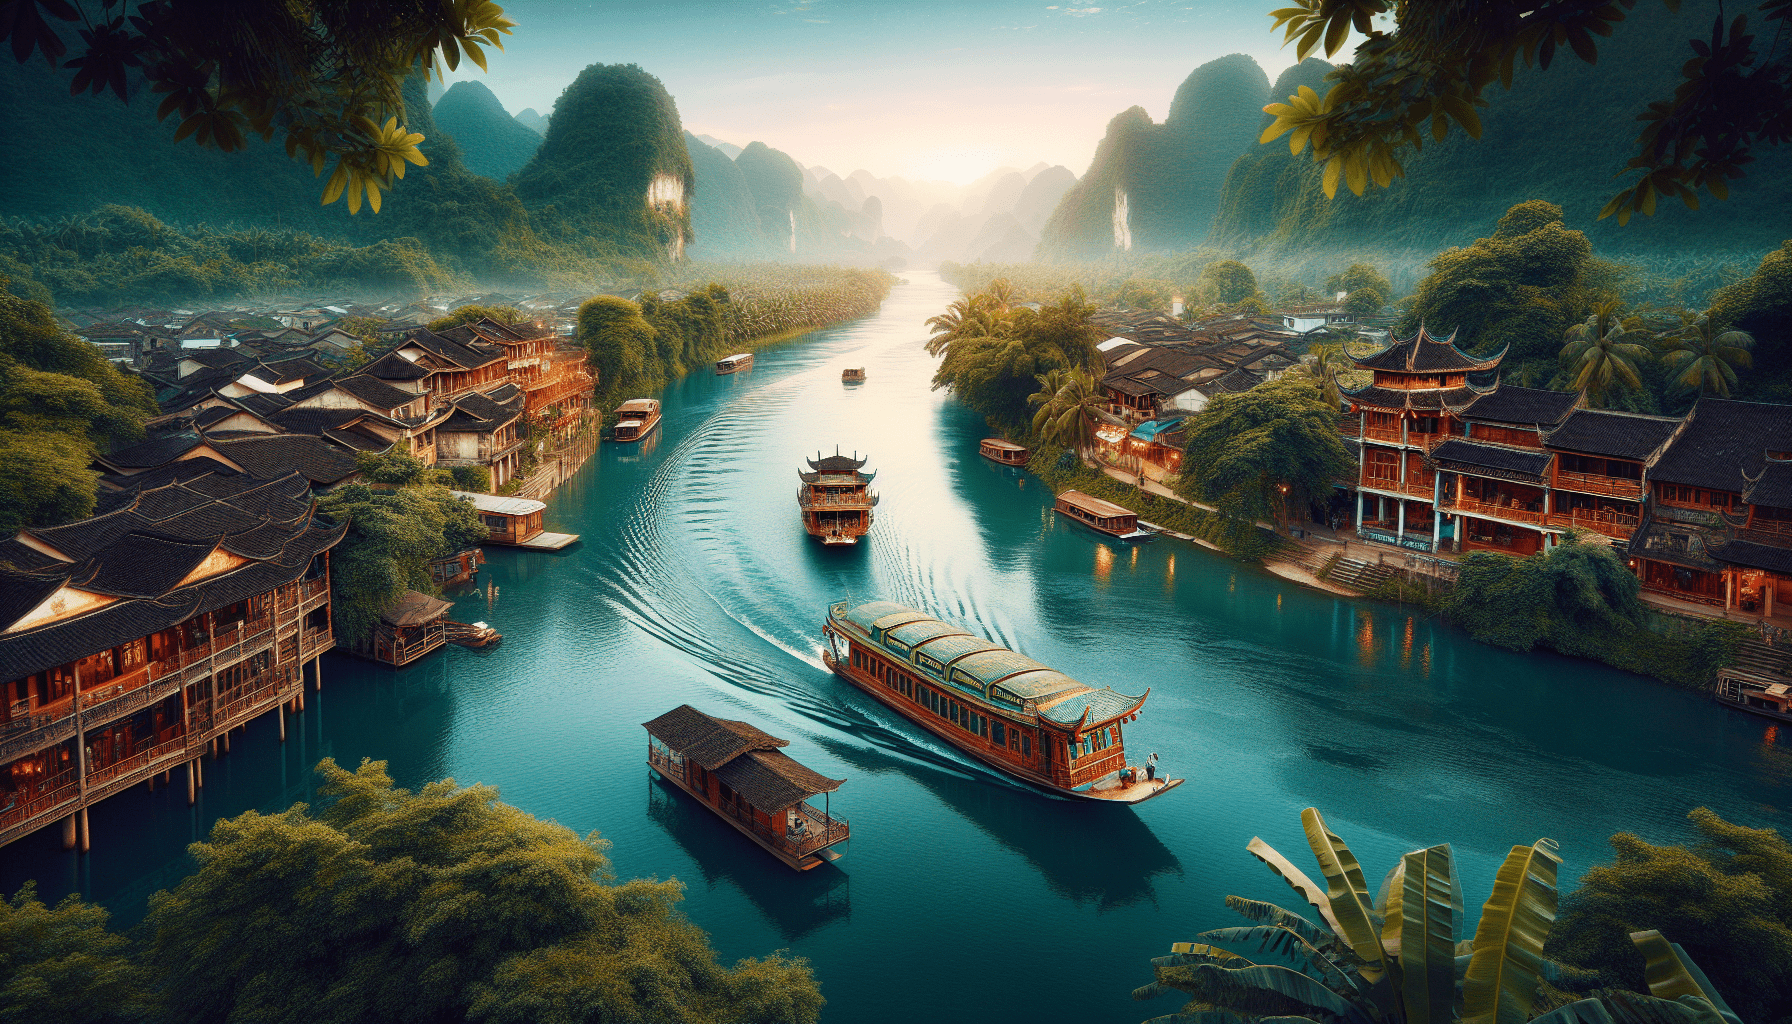 Which Is The Longest River Cruise In Asia?